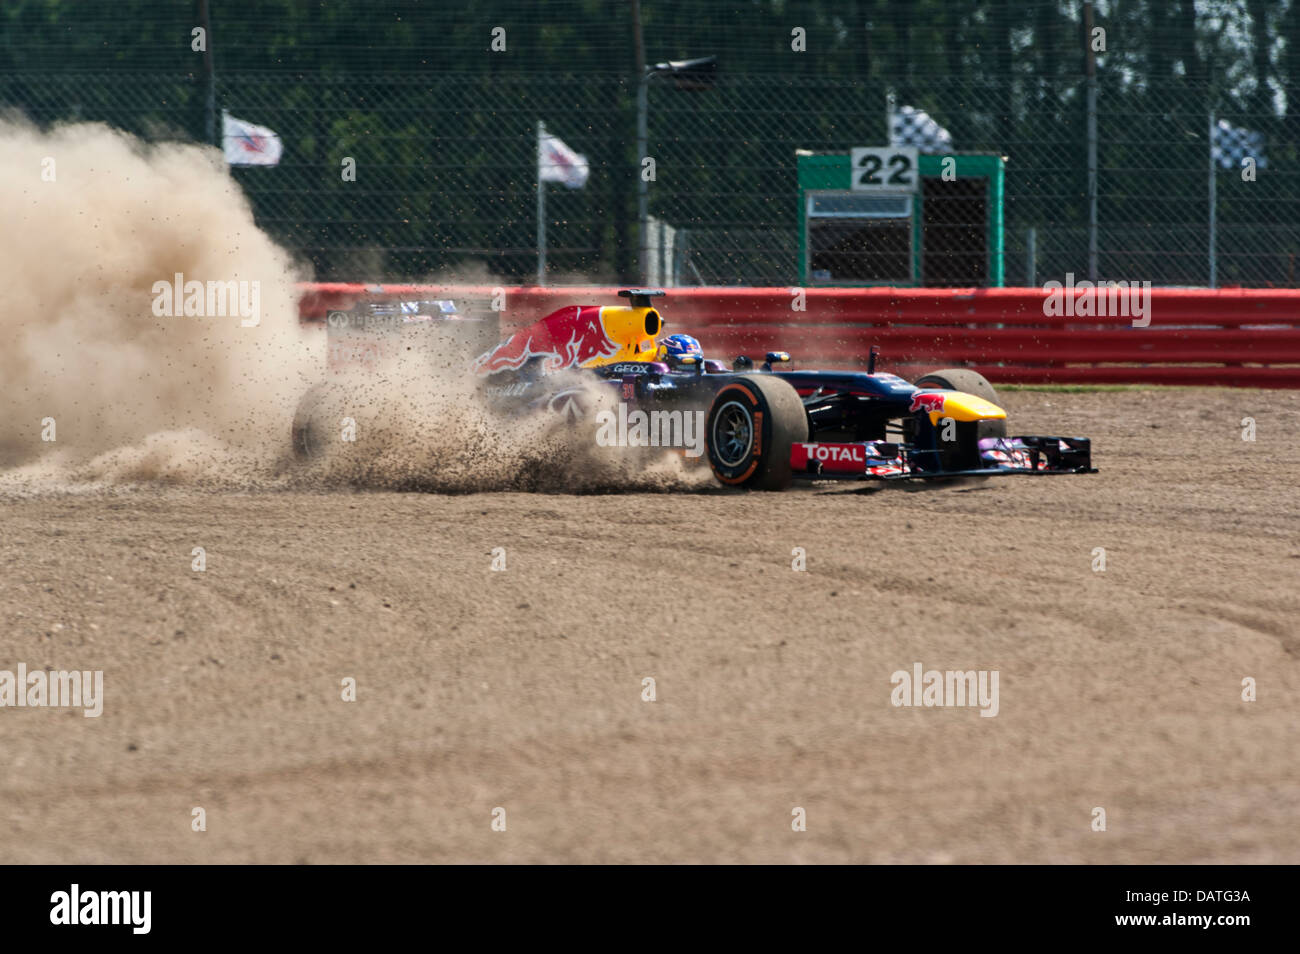 SILVERSTONE, UK - JULY 18: Daniel Ricciardo drives for Red Bull Racing during the Formula One Young Drivers Test Stock Photo